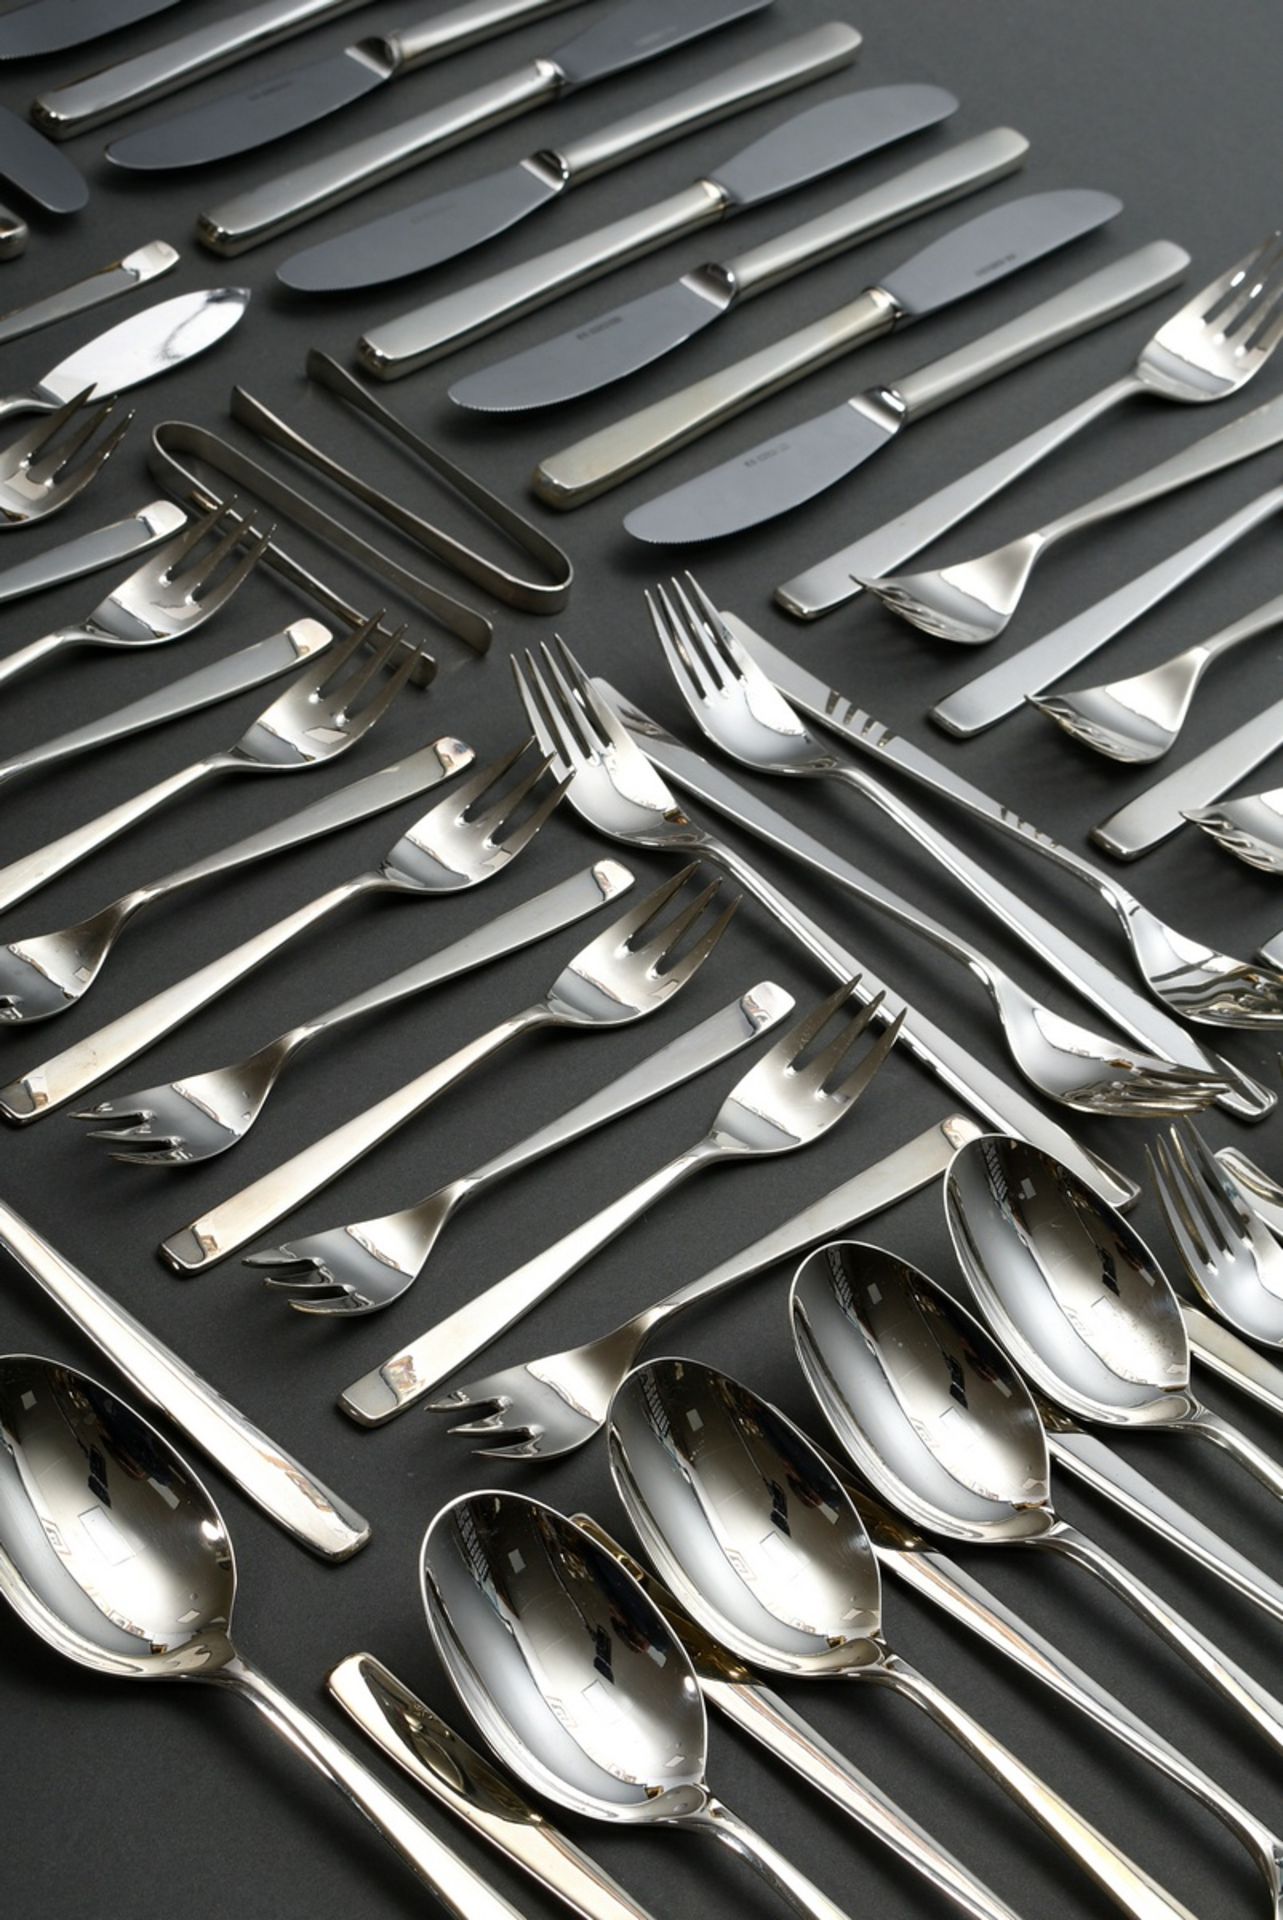 83 pieces Wilkens cutlery ‘Modern’, silver 800, 2361g (without knives), consisting of: 13 table kni - Image 2 of 7